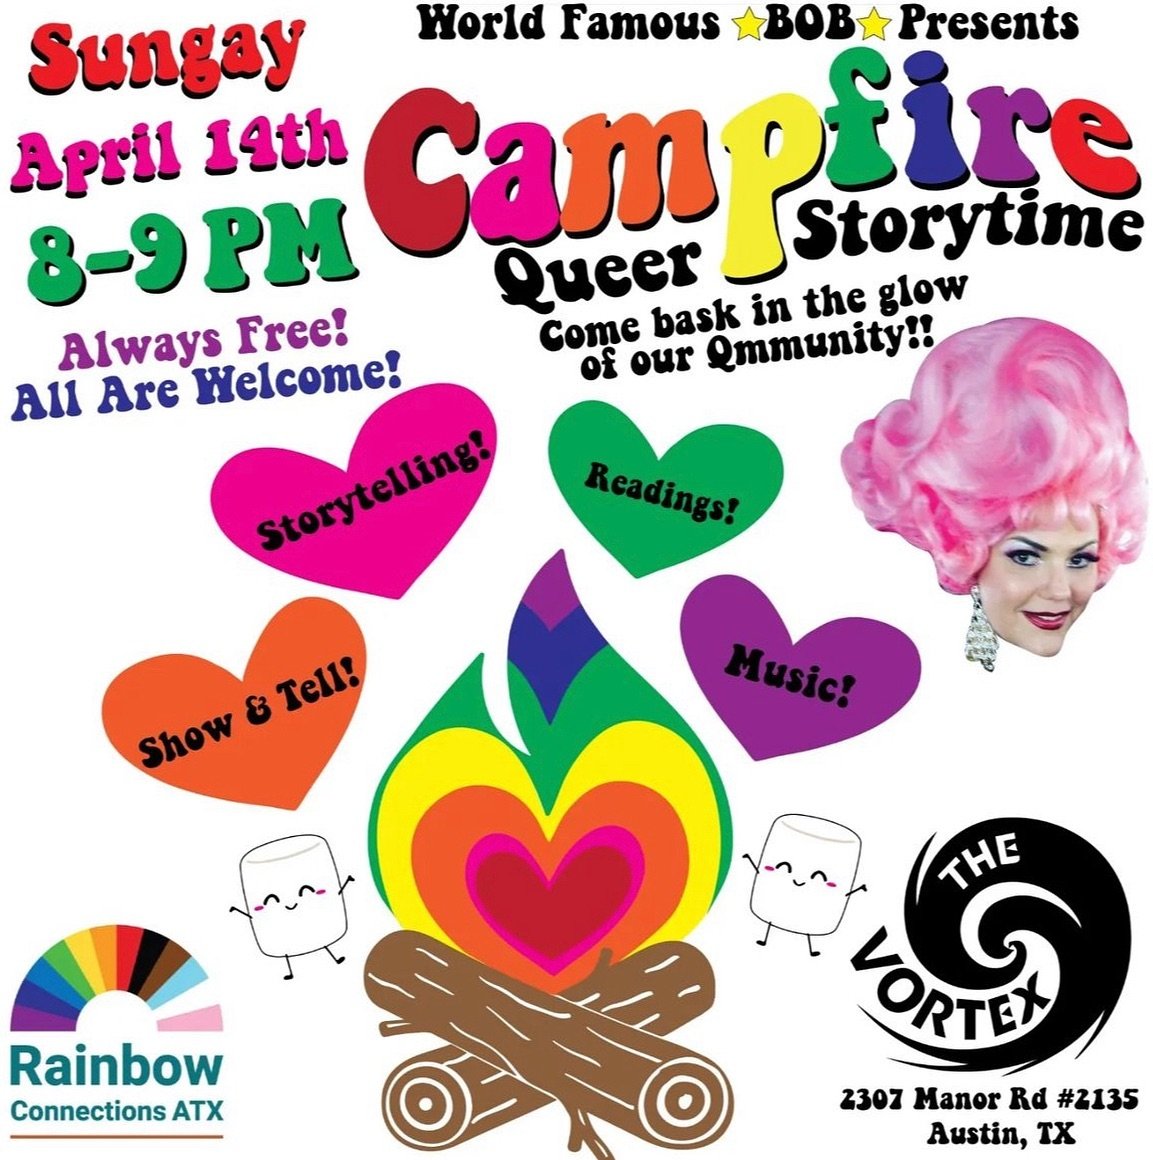 🌈TONIGHT🌈

5:30PM - 100th TGQ Social Anniversary! @tgqsocial 

8:00PM - Campfire Queer Storytime! - hosted by @worldfamousbob and @rainbowconnectionsatx